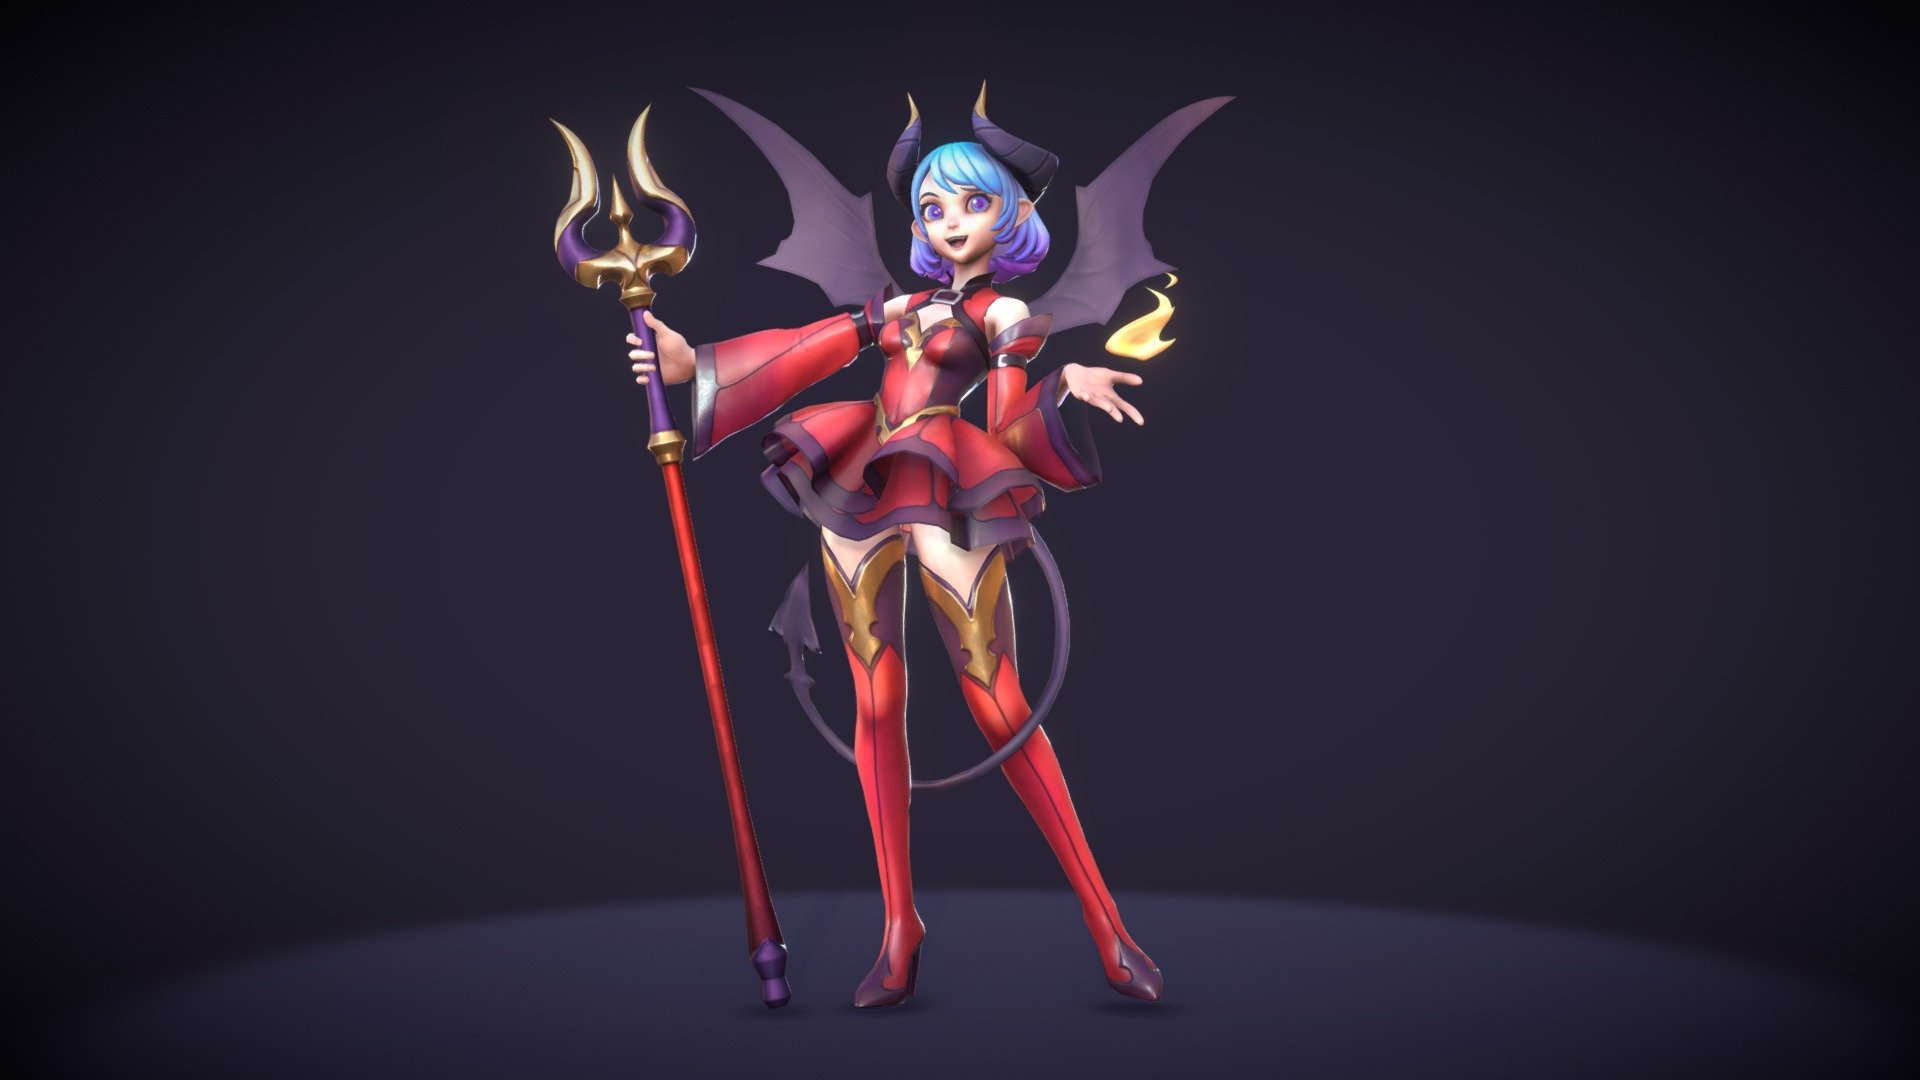 A semi PBR character that i did in my free time base on concept of Yuka Soemy https://www.artstation.com/artwork/8NX2x, try my best to achive the 2d felling through 3d modeling and texture PBR - DemonGirl - 3D model by alphatele 3d model